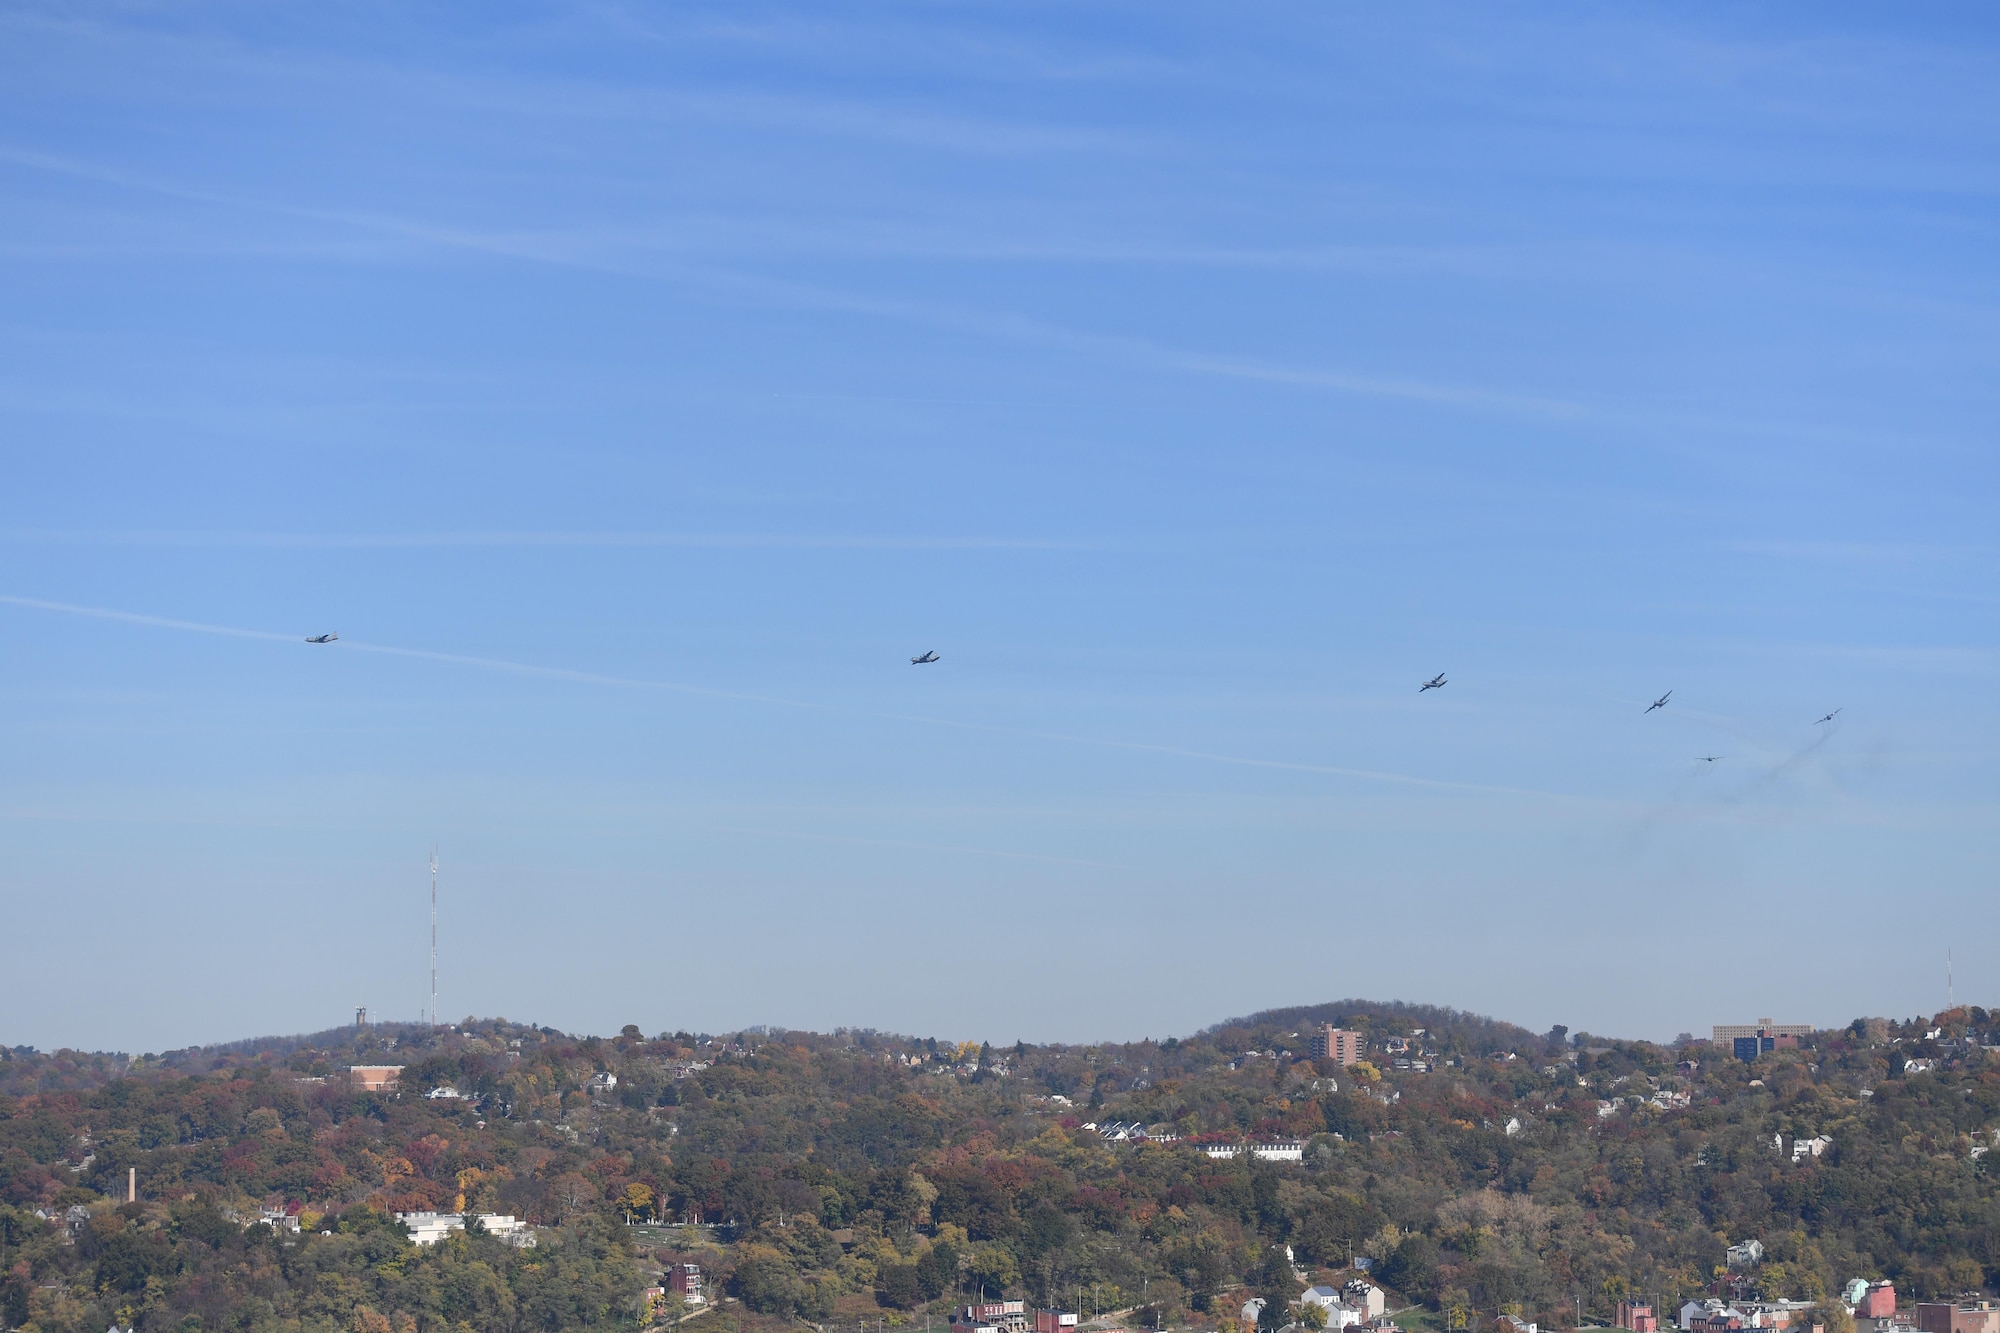 Six C-130 Hercules aircraft fly over the fall foliage of Pittsburgh, Pennsylvania, during Exercise Steel Challenge 16-01, November 6, 2016. The exercise involved the simultaneous generation and launch of six aircraft that later split up to conduct separate training missions. (U.S. Air Force photo by Staff Sgt. Marjorie A. Bowlden)